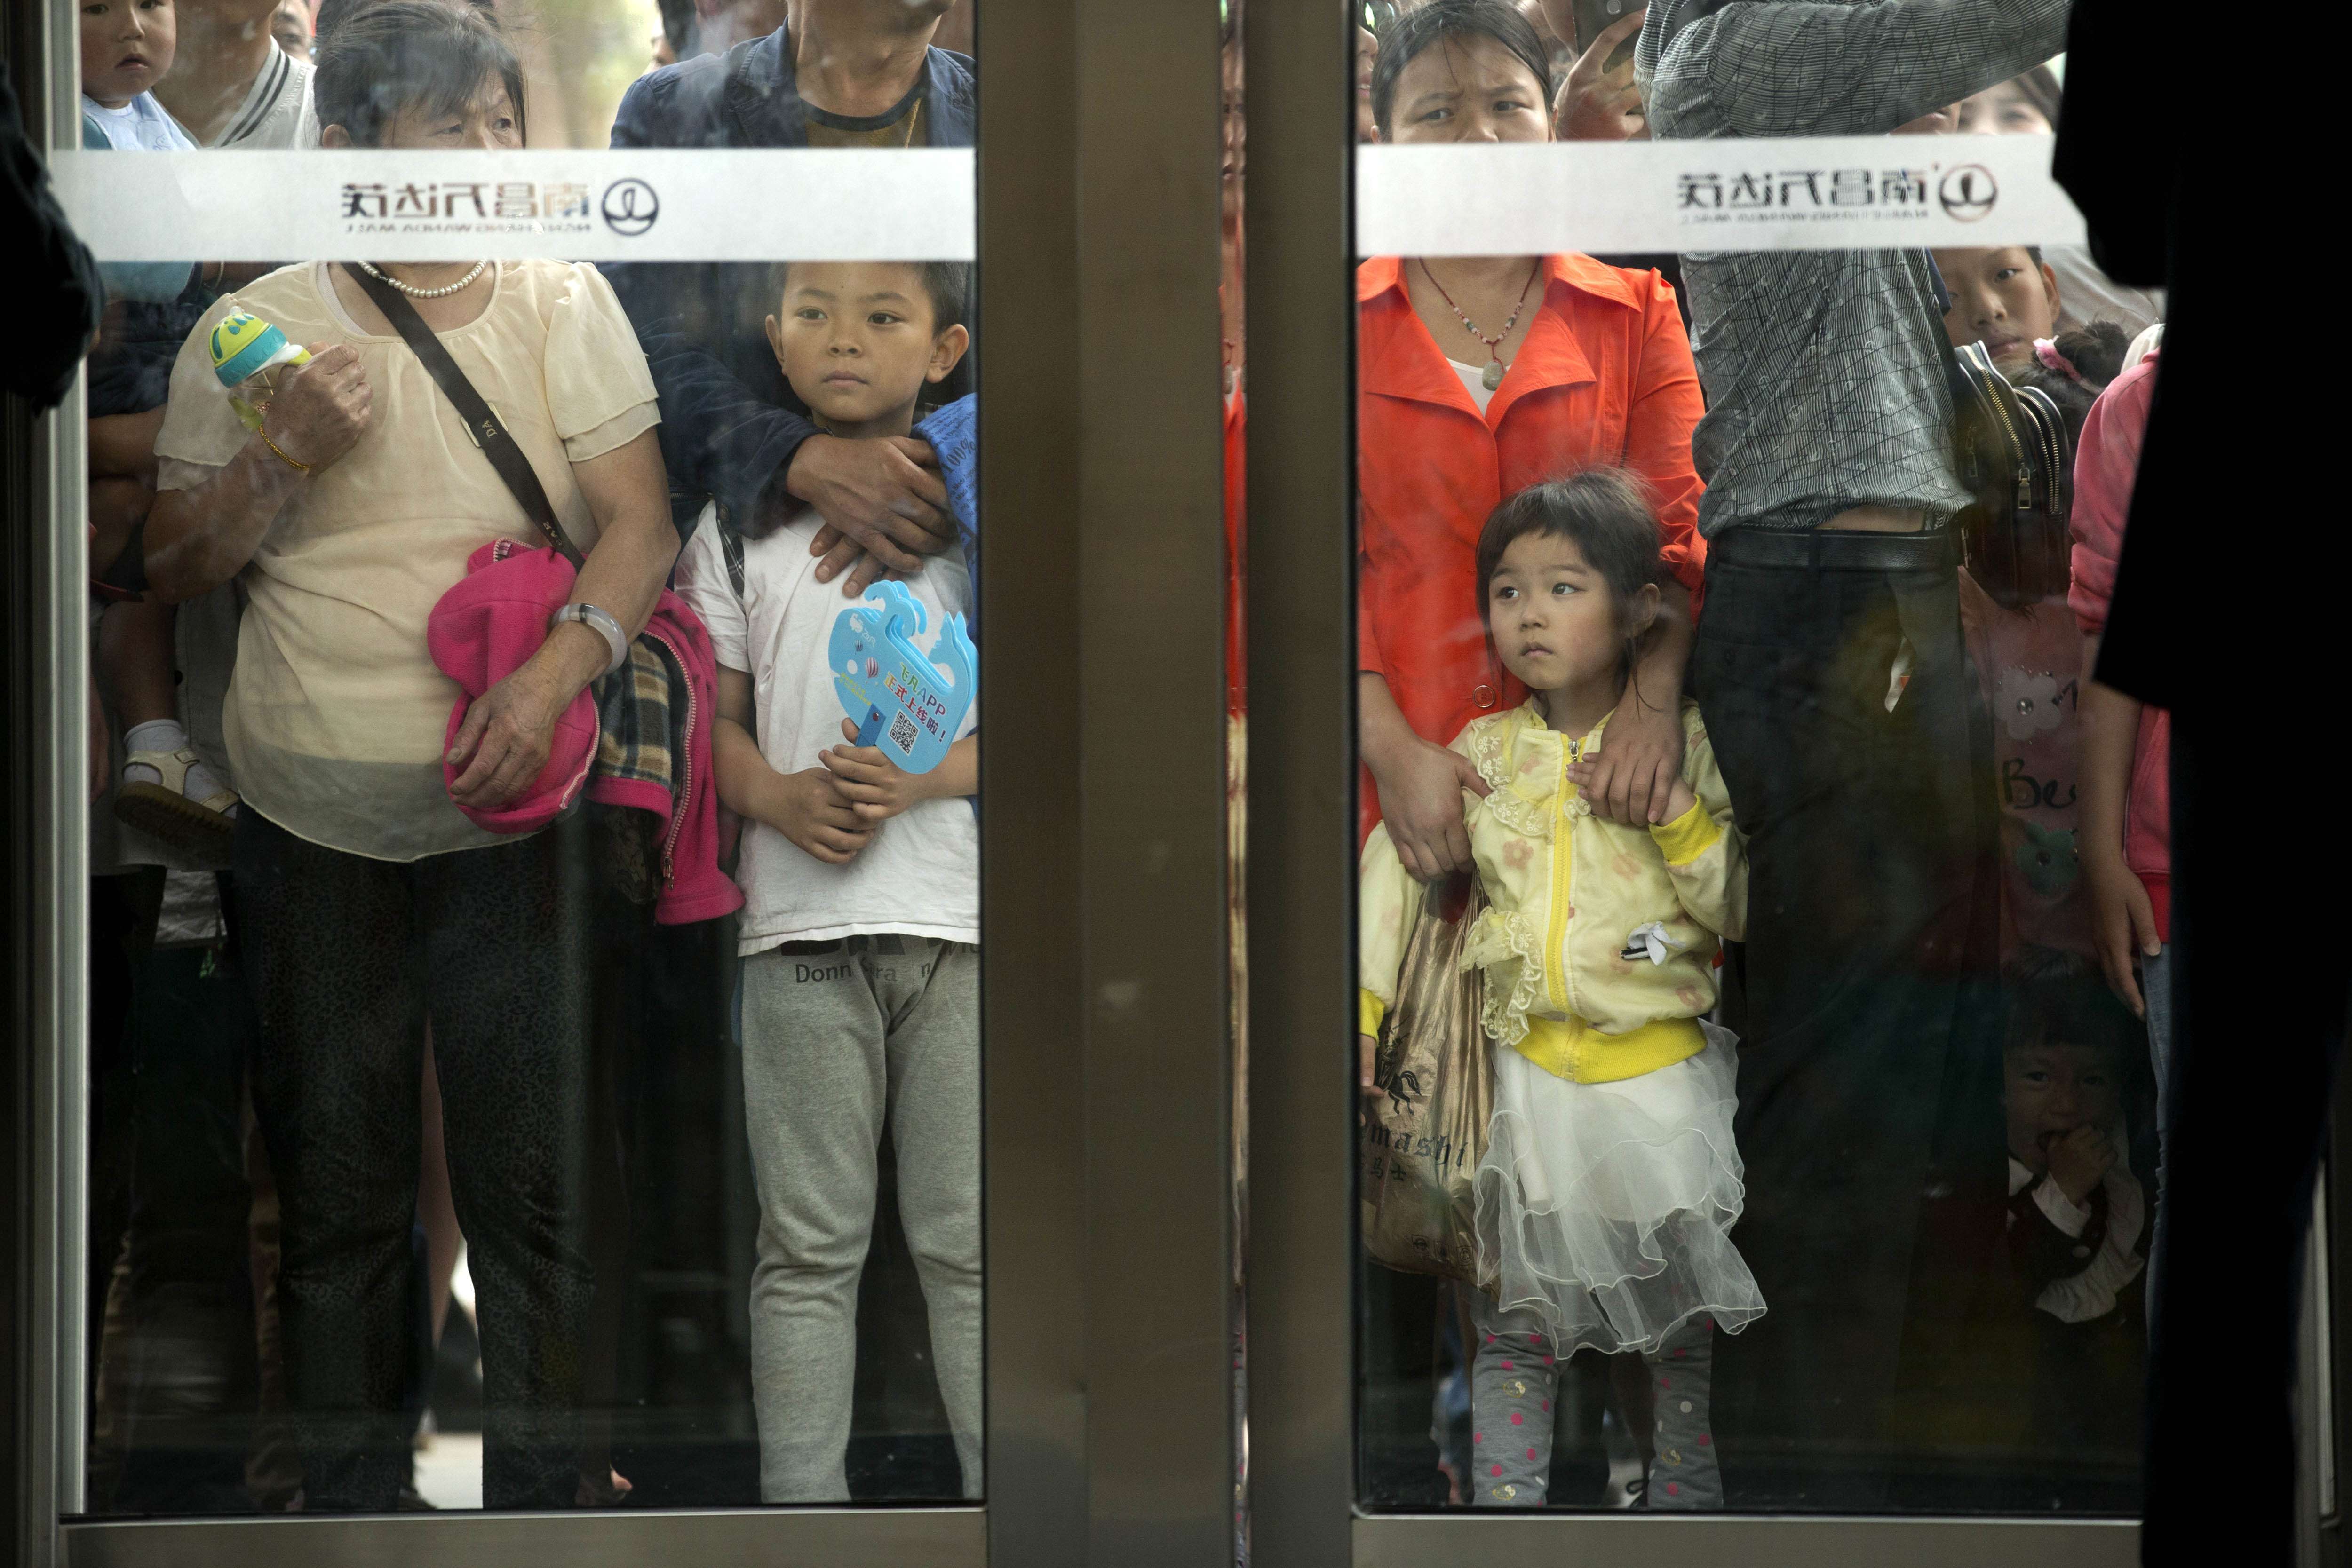 Chinese people queue to enter an entertainment complex in Nanchang, Jiangxi province. In interviews by journalists for several “top” Western news sources, the main question posed was whether the Qiaobi ad shows that “the Chinese are racist”. Photo: AP